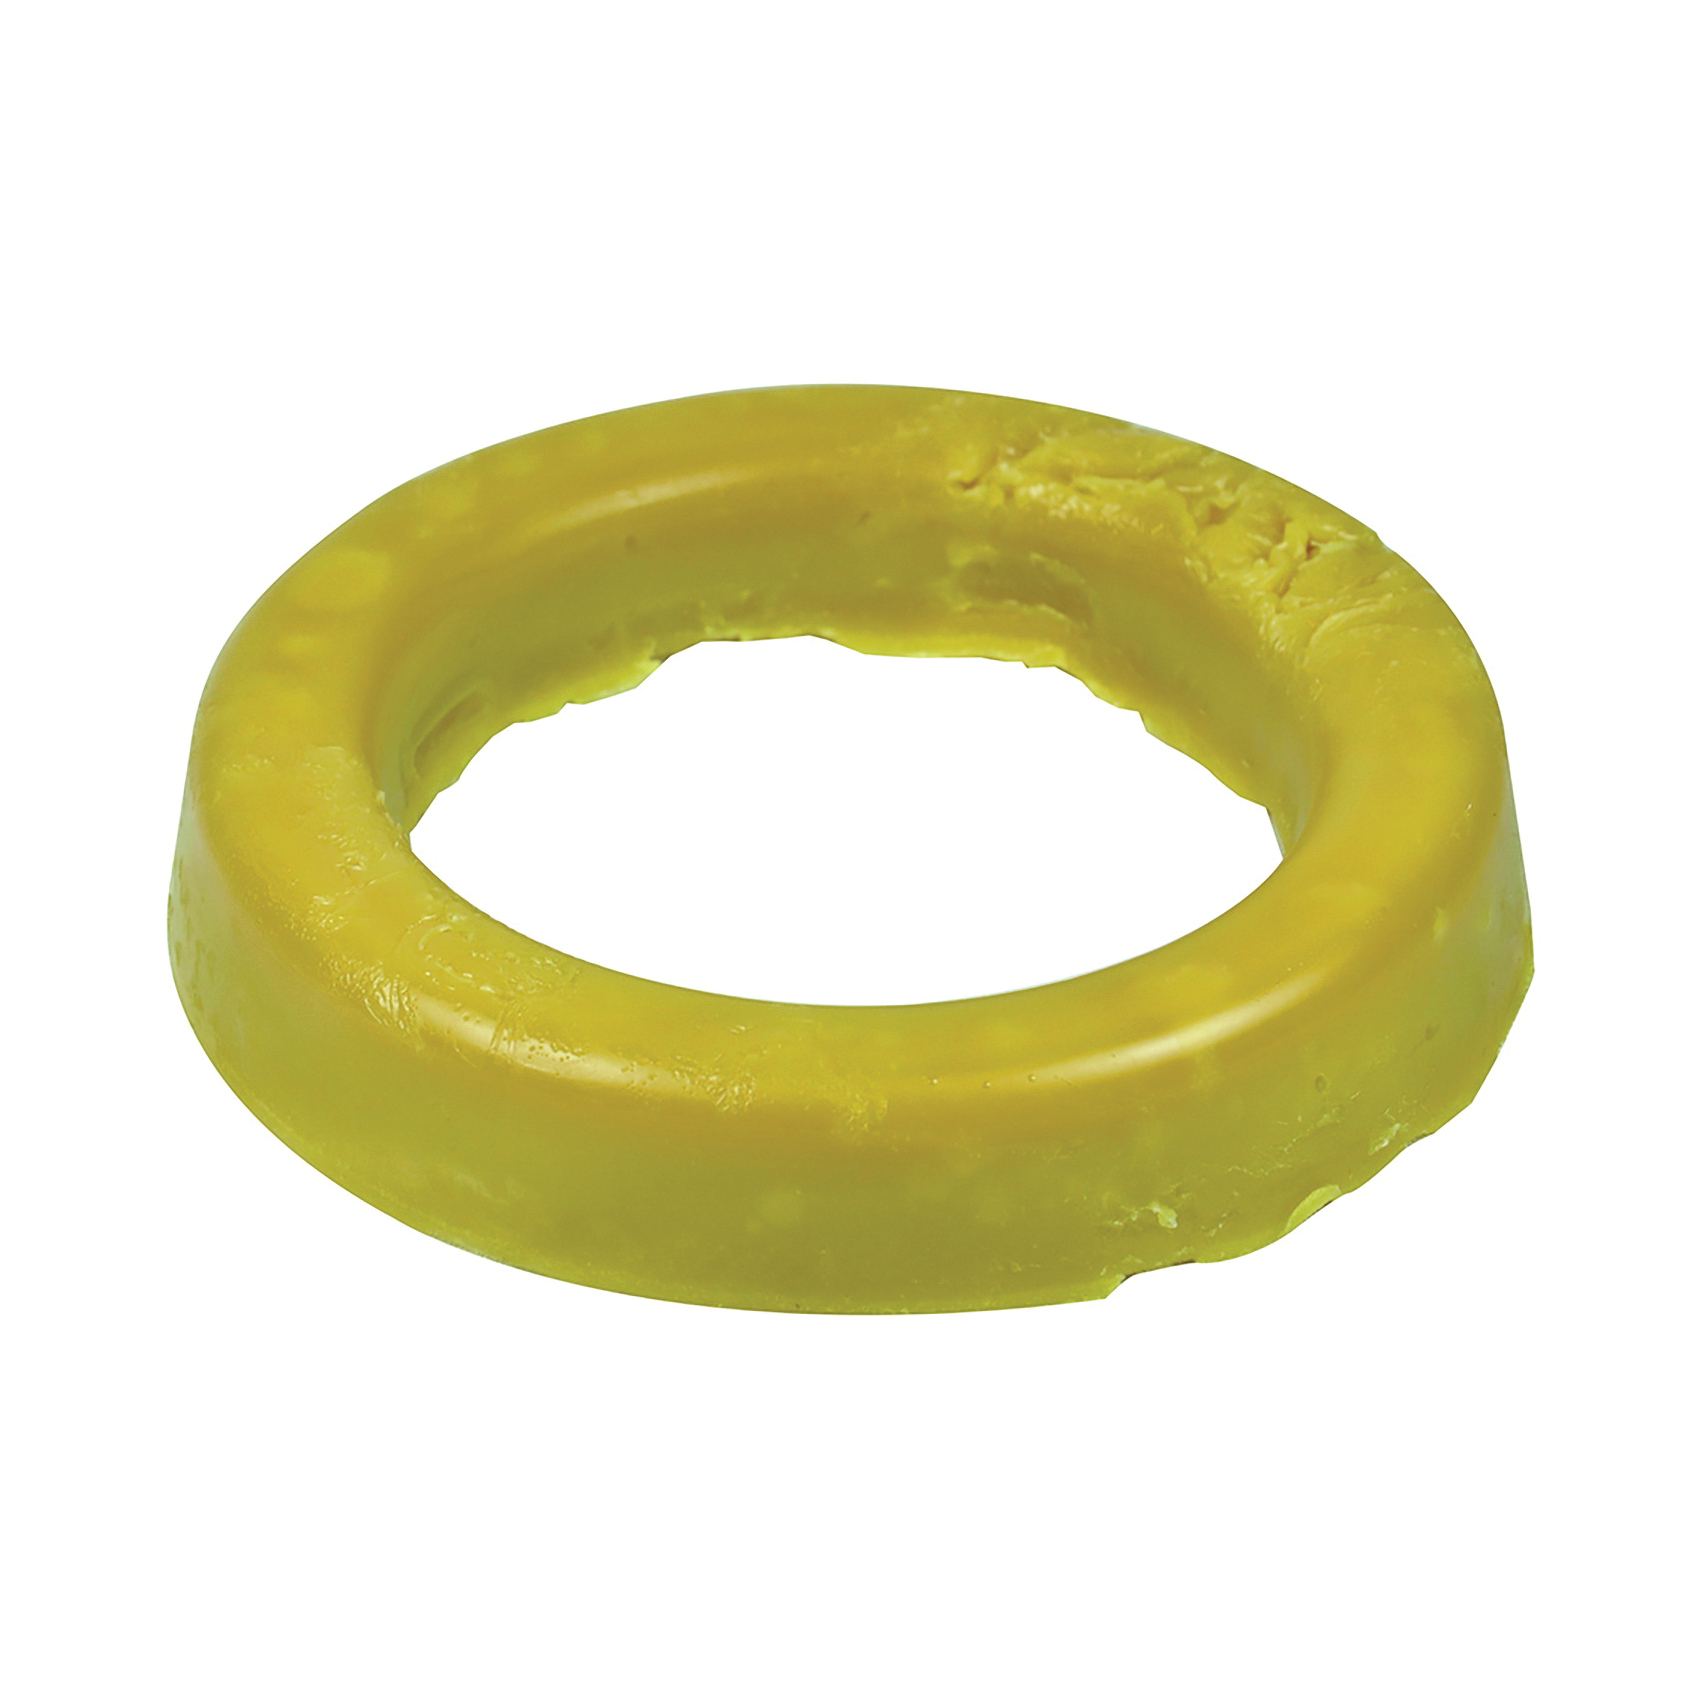 40618 Closet Wax Ring Bowl, For: 3 in and 4 in Openings